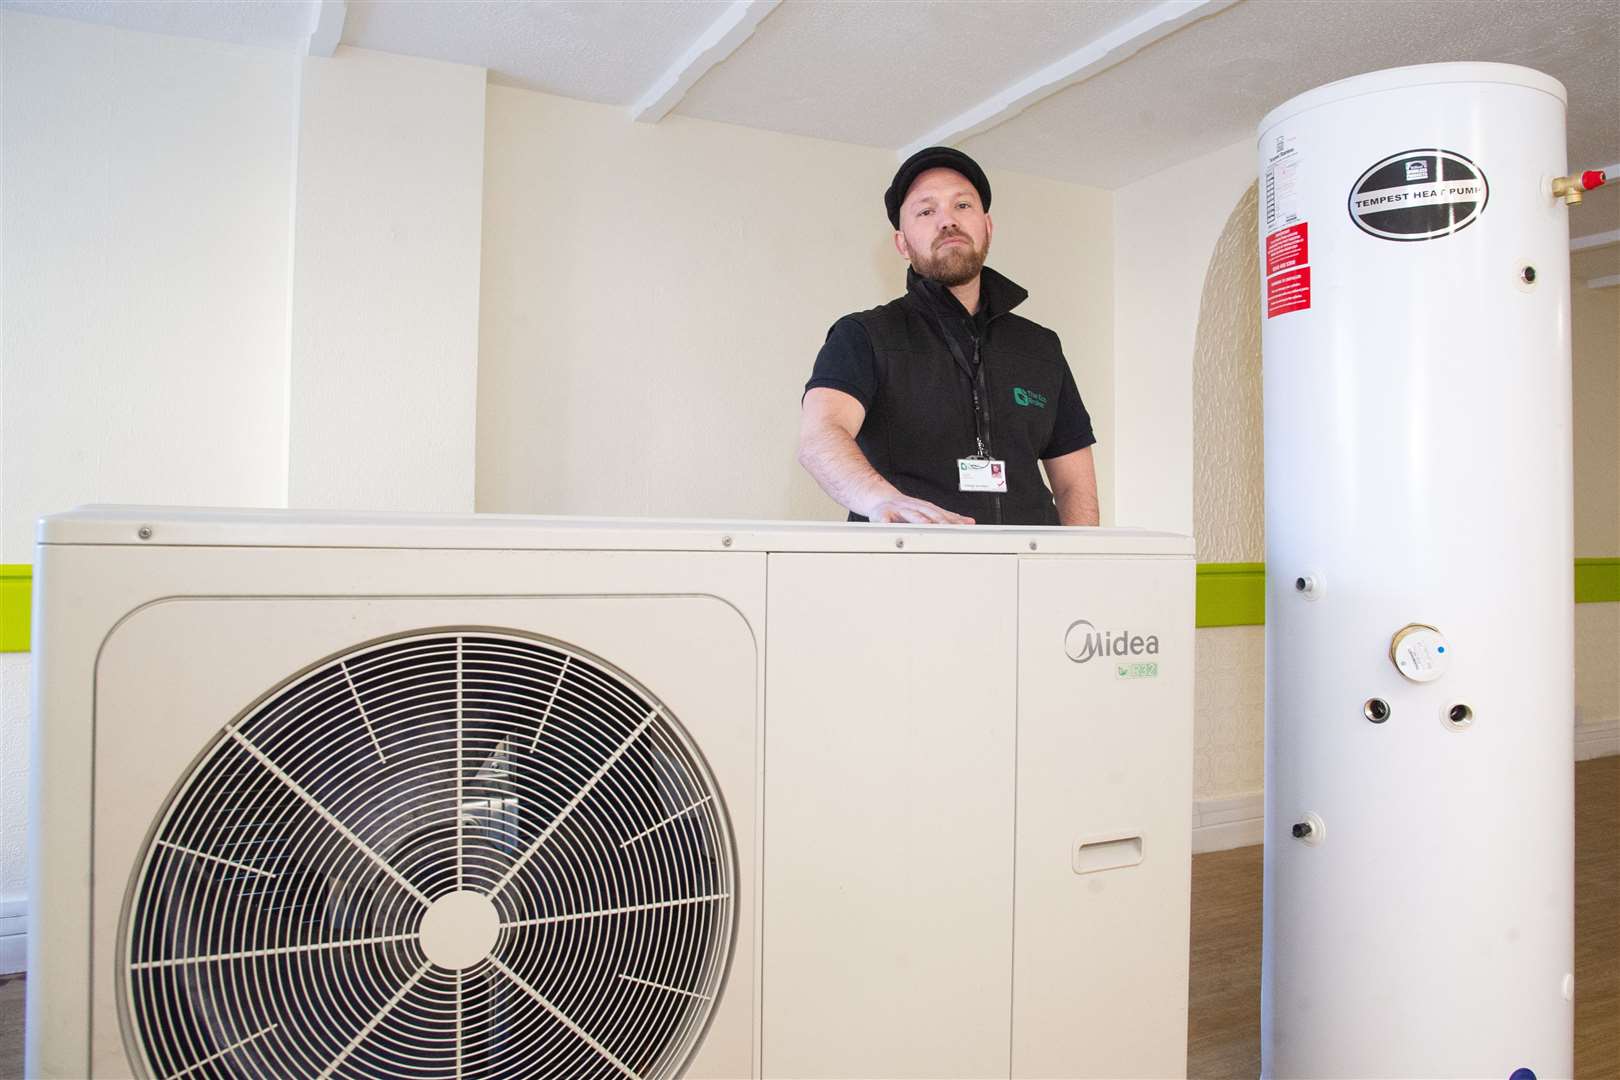 The Eco Broker's Joe Gilchrist is hoping to raise awareness of the funding available for a variety of heating and insulation schemes. Picture: Daniel Forsyth